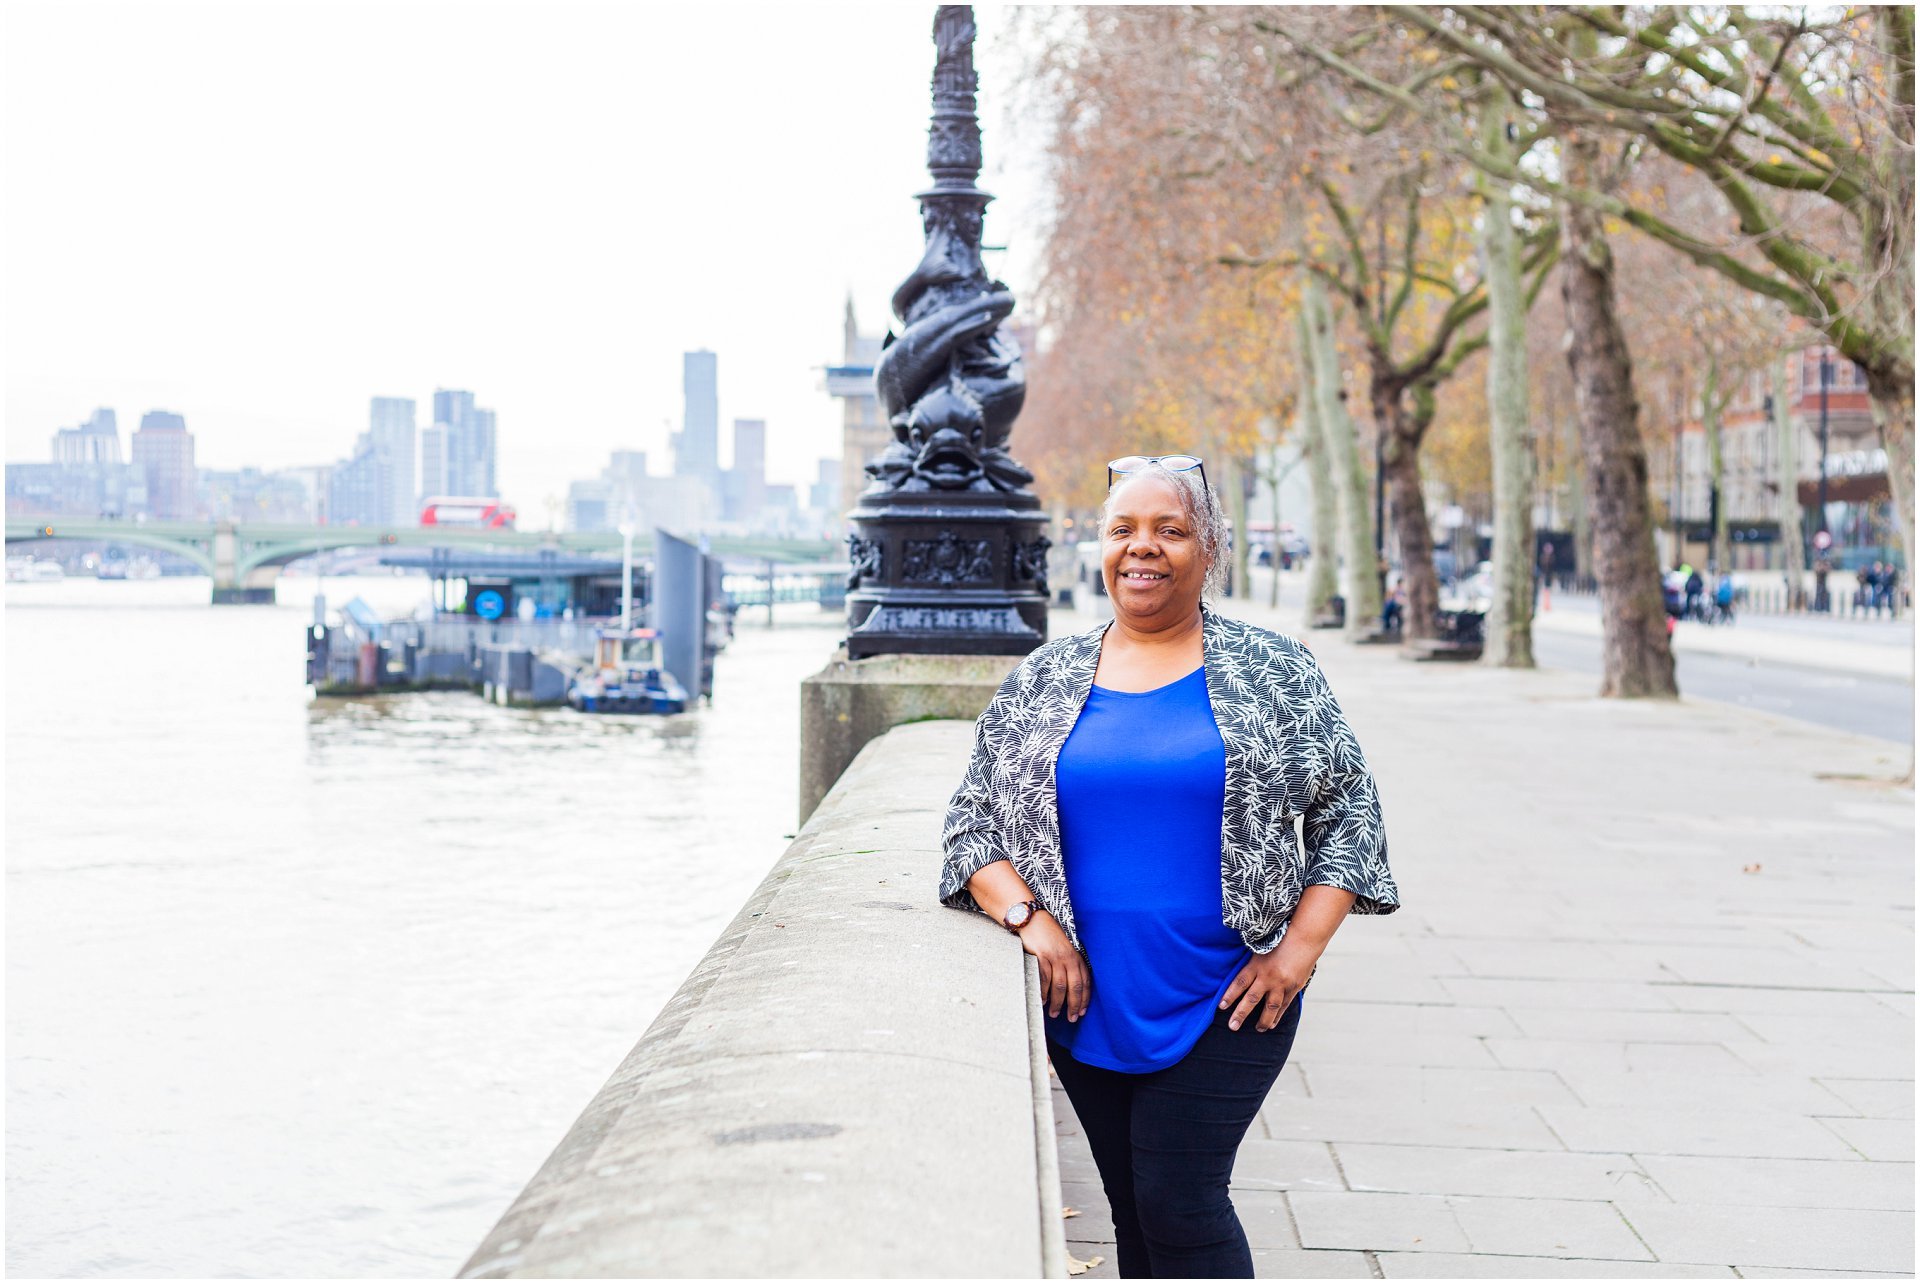 London brand shoot on the Thames with confidence and mindset coach Phyllis Woodfine. Images by London brand photographer AKP Branding Stories